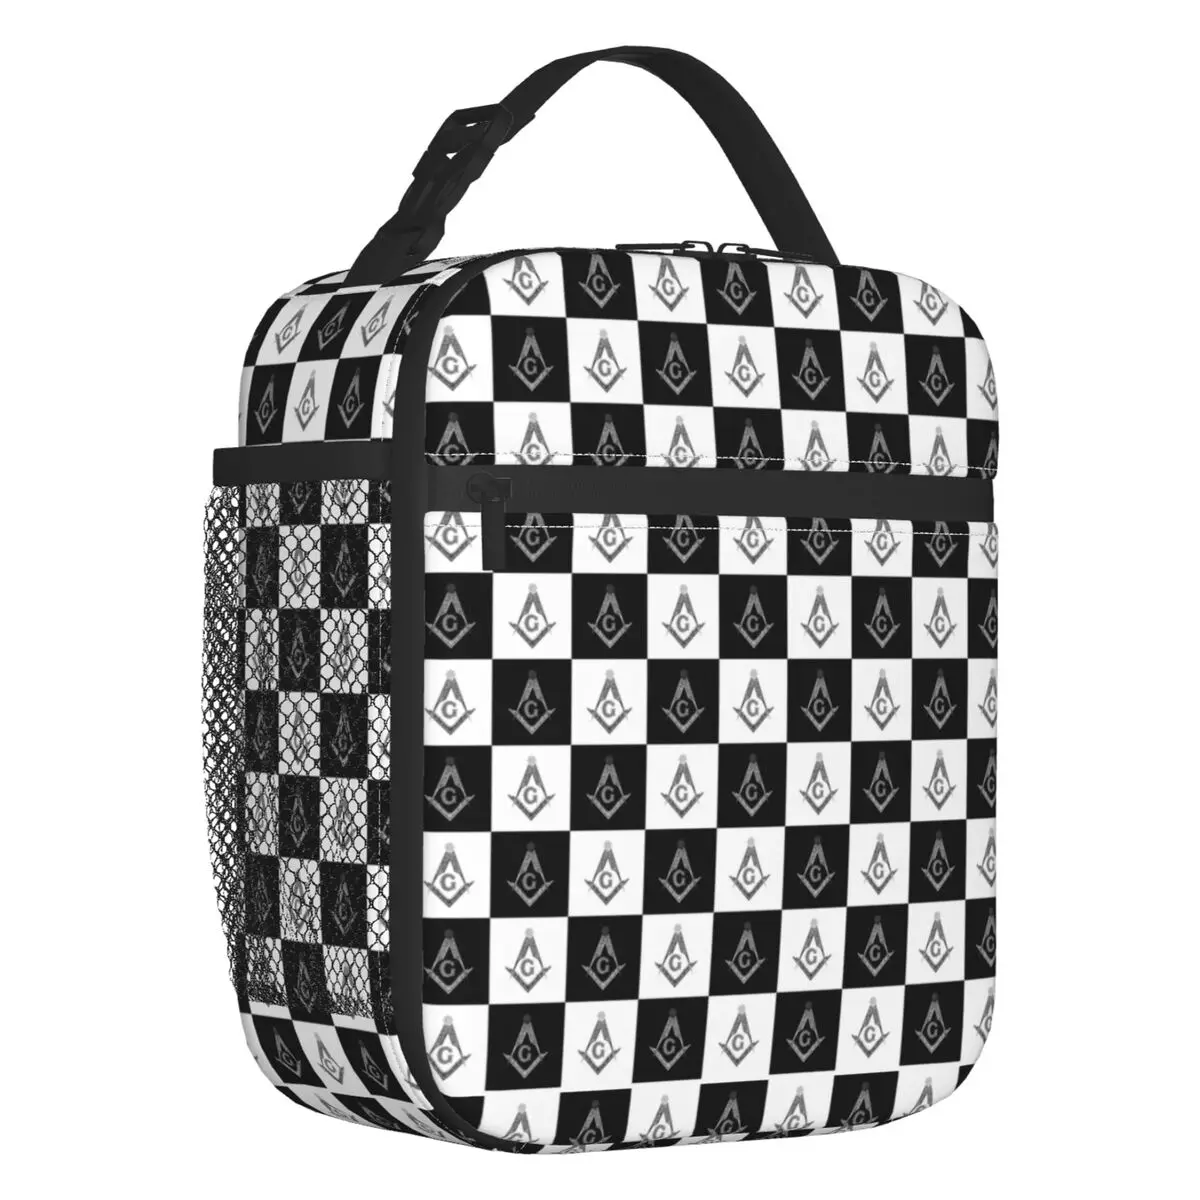 Freemason Checkered Pattern Insulated Lunch Bag for Women Resuable Mason Masonic Cooler Thermal Lunch Tote Beach Camping Travel